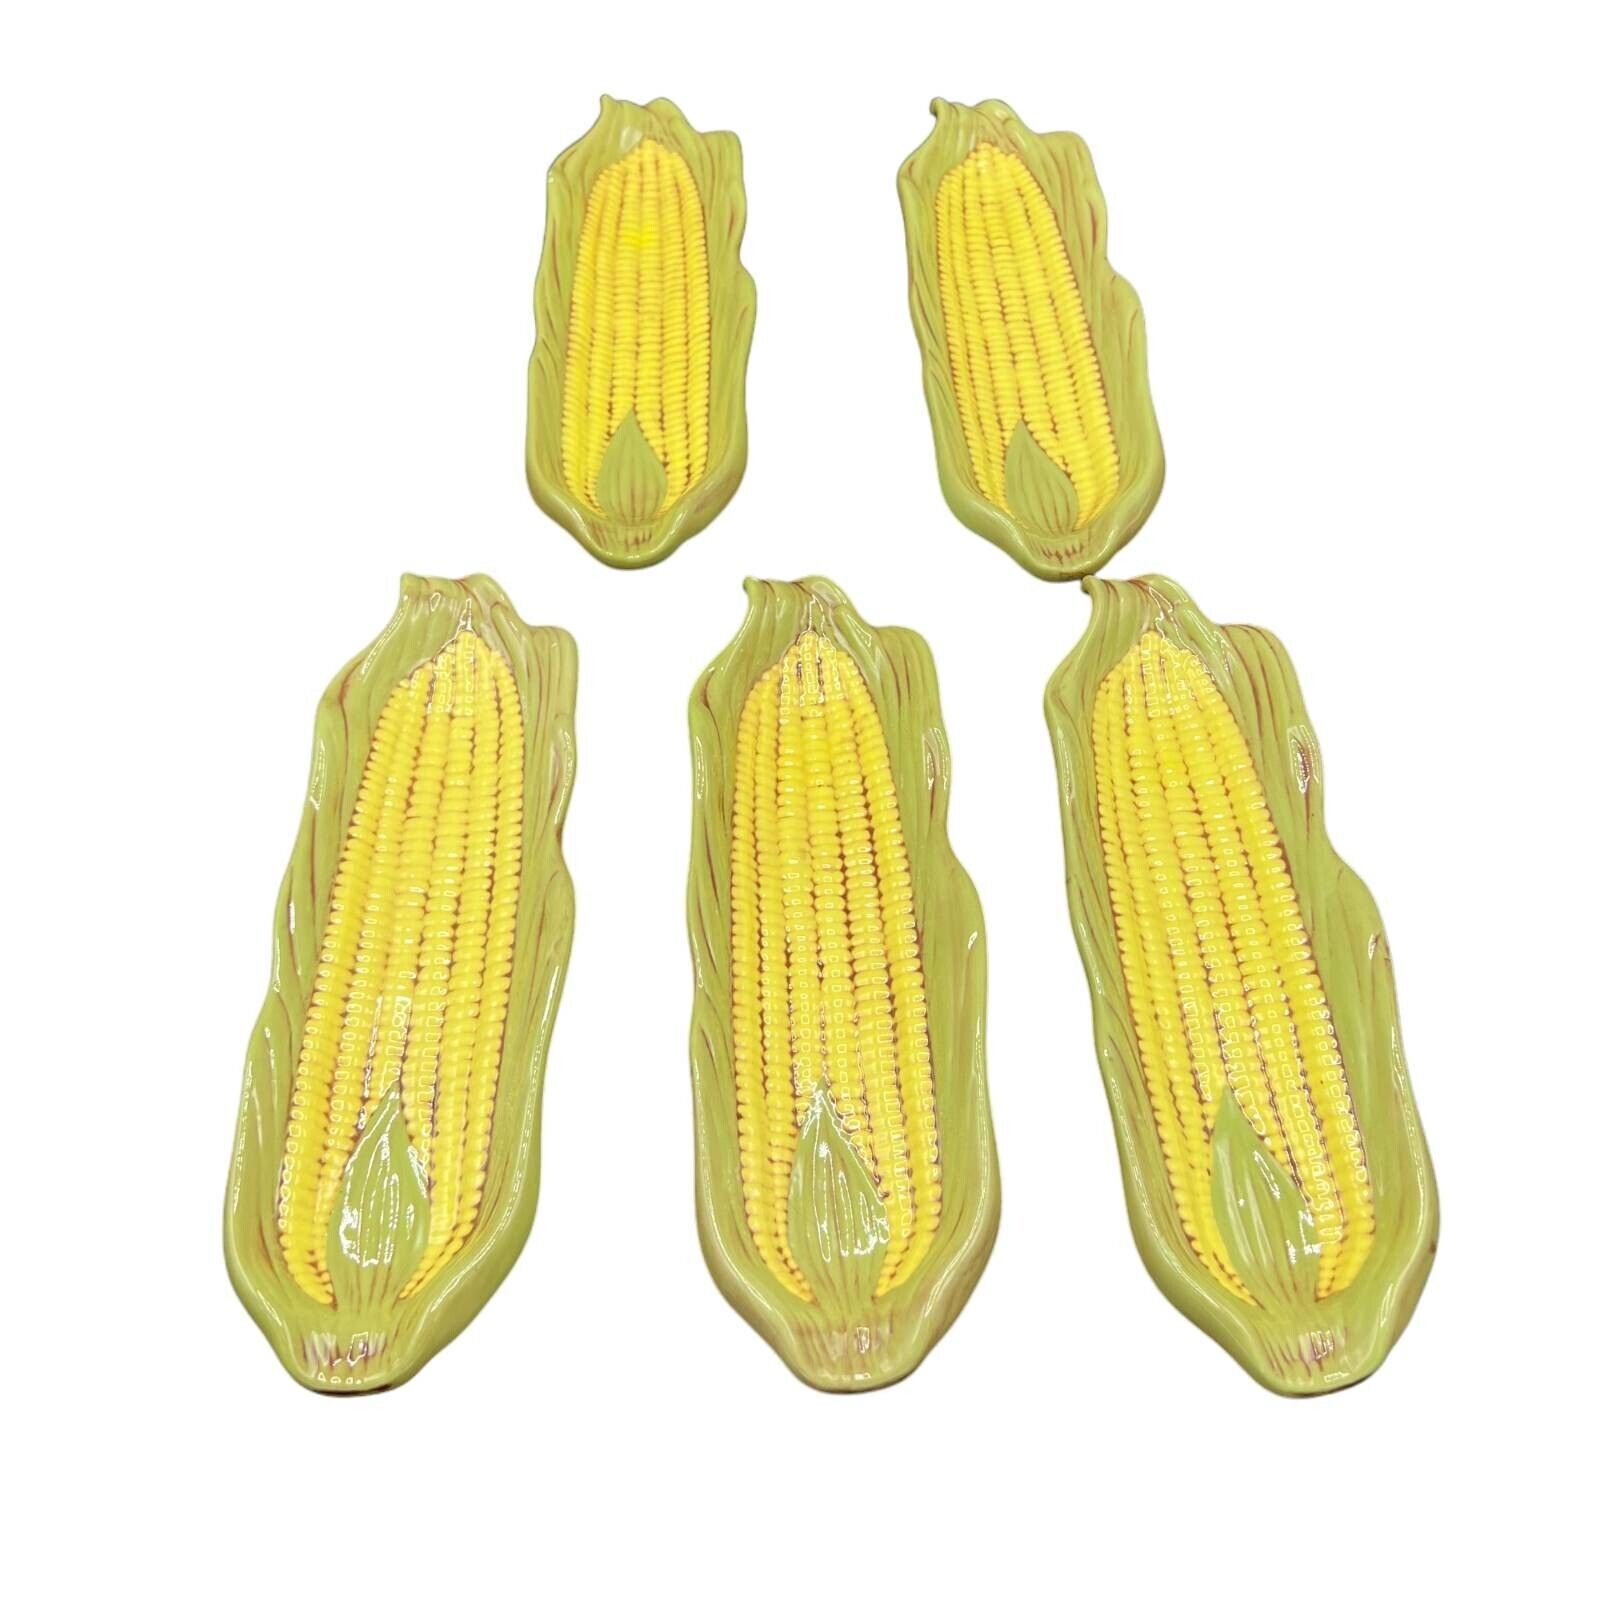 Vintage Corn On The Cob Serving Dishes Ceramic Yellow Set Of 5